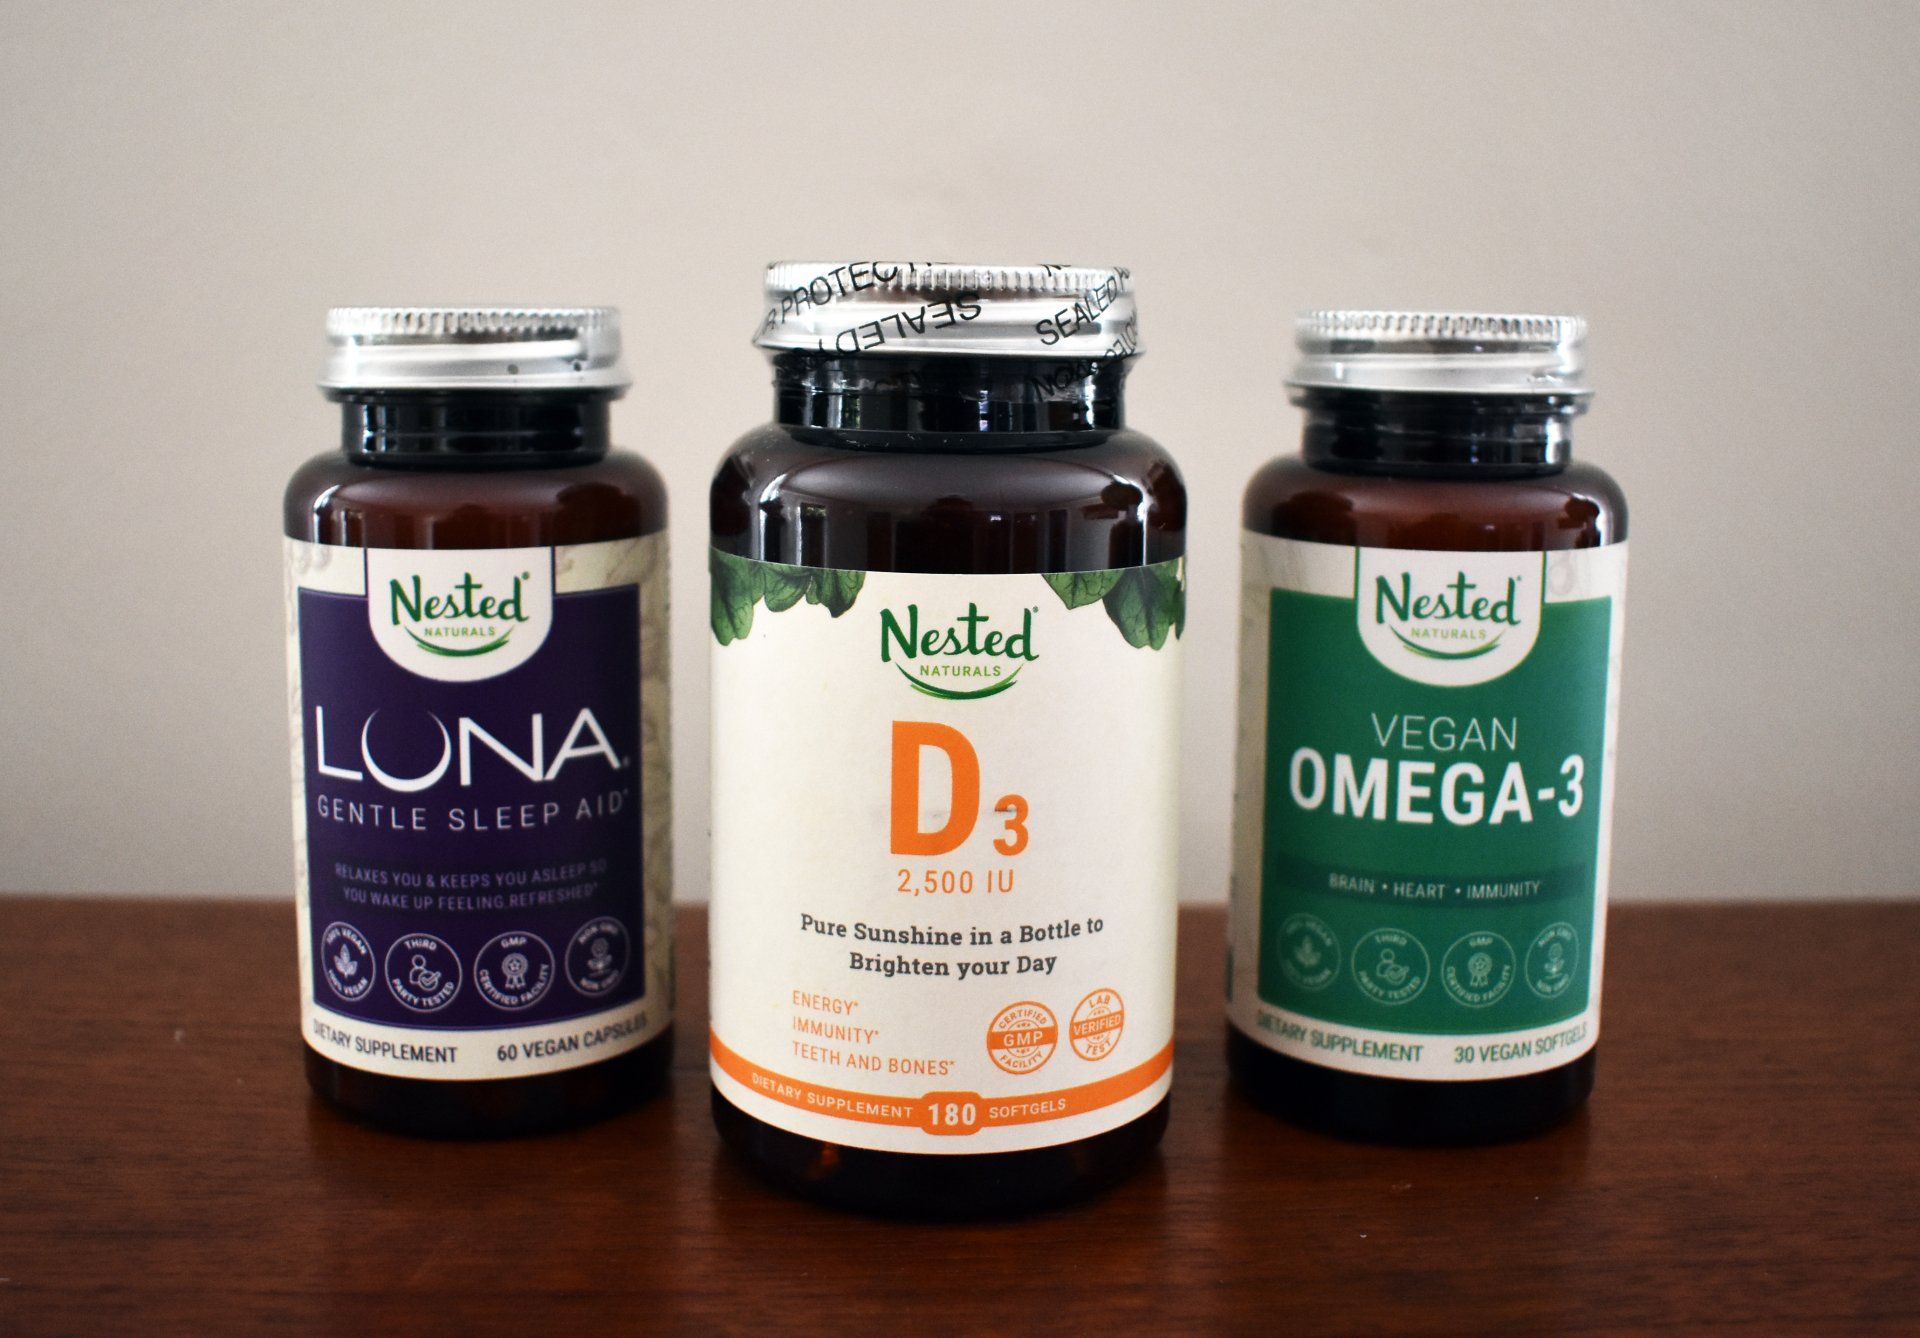 Nested Naturals products